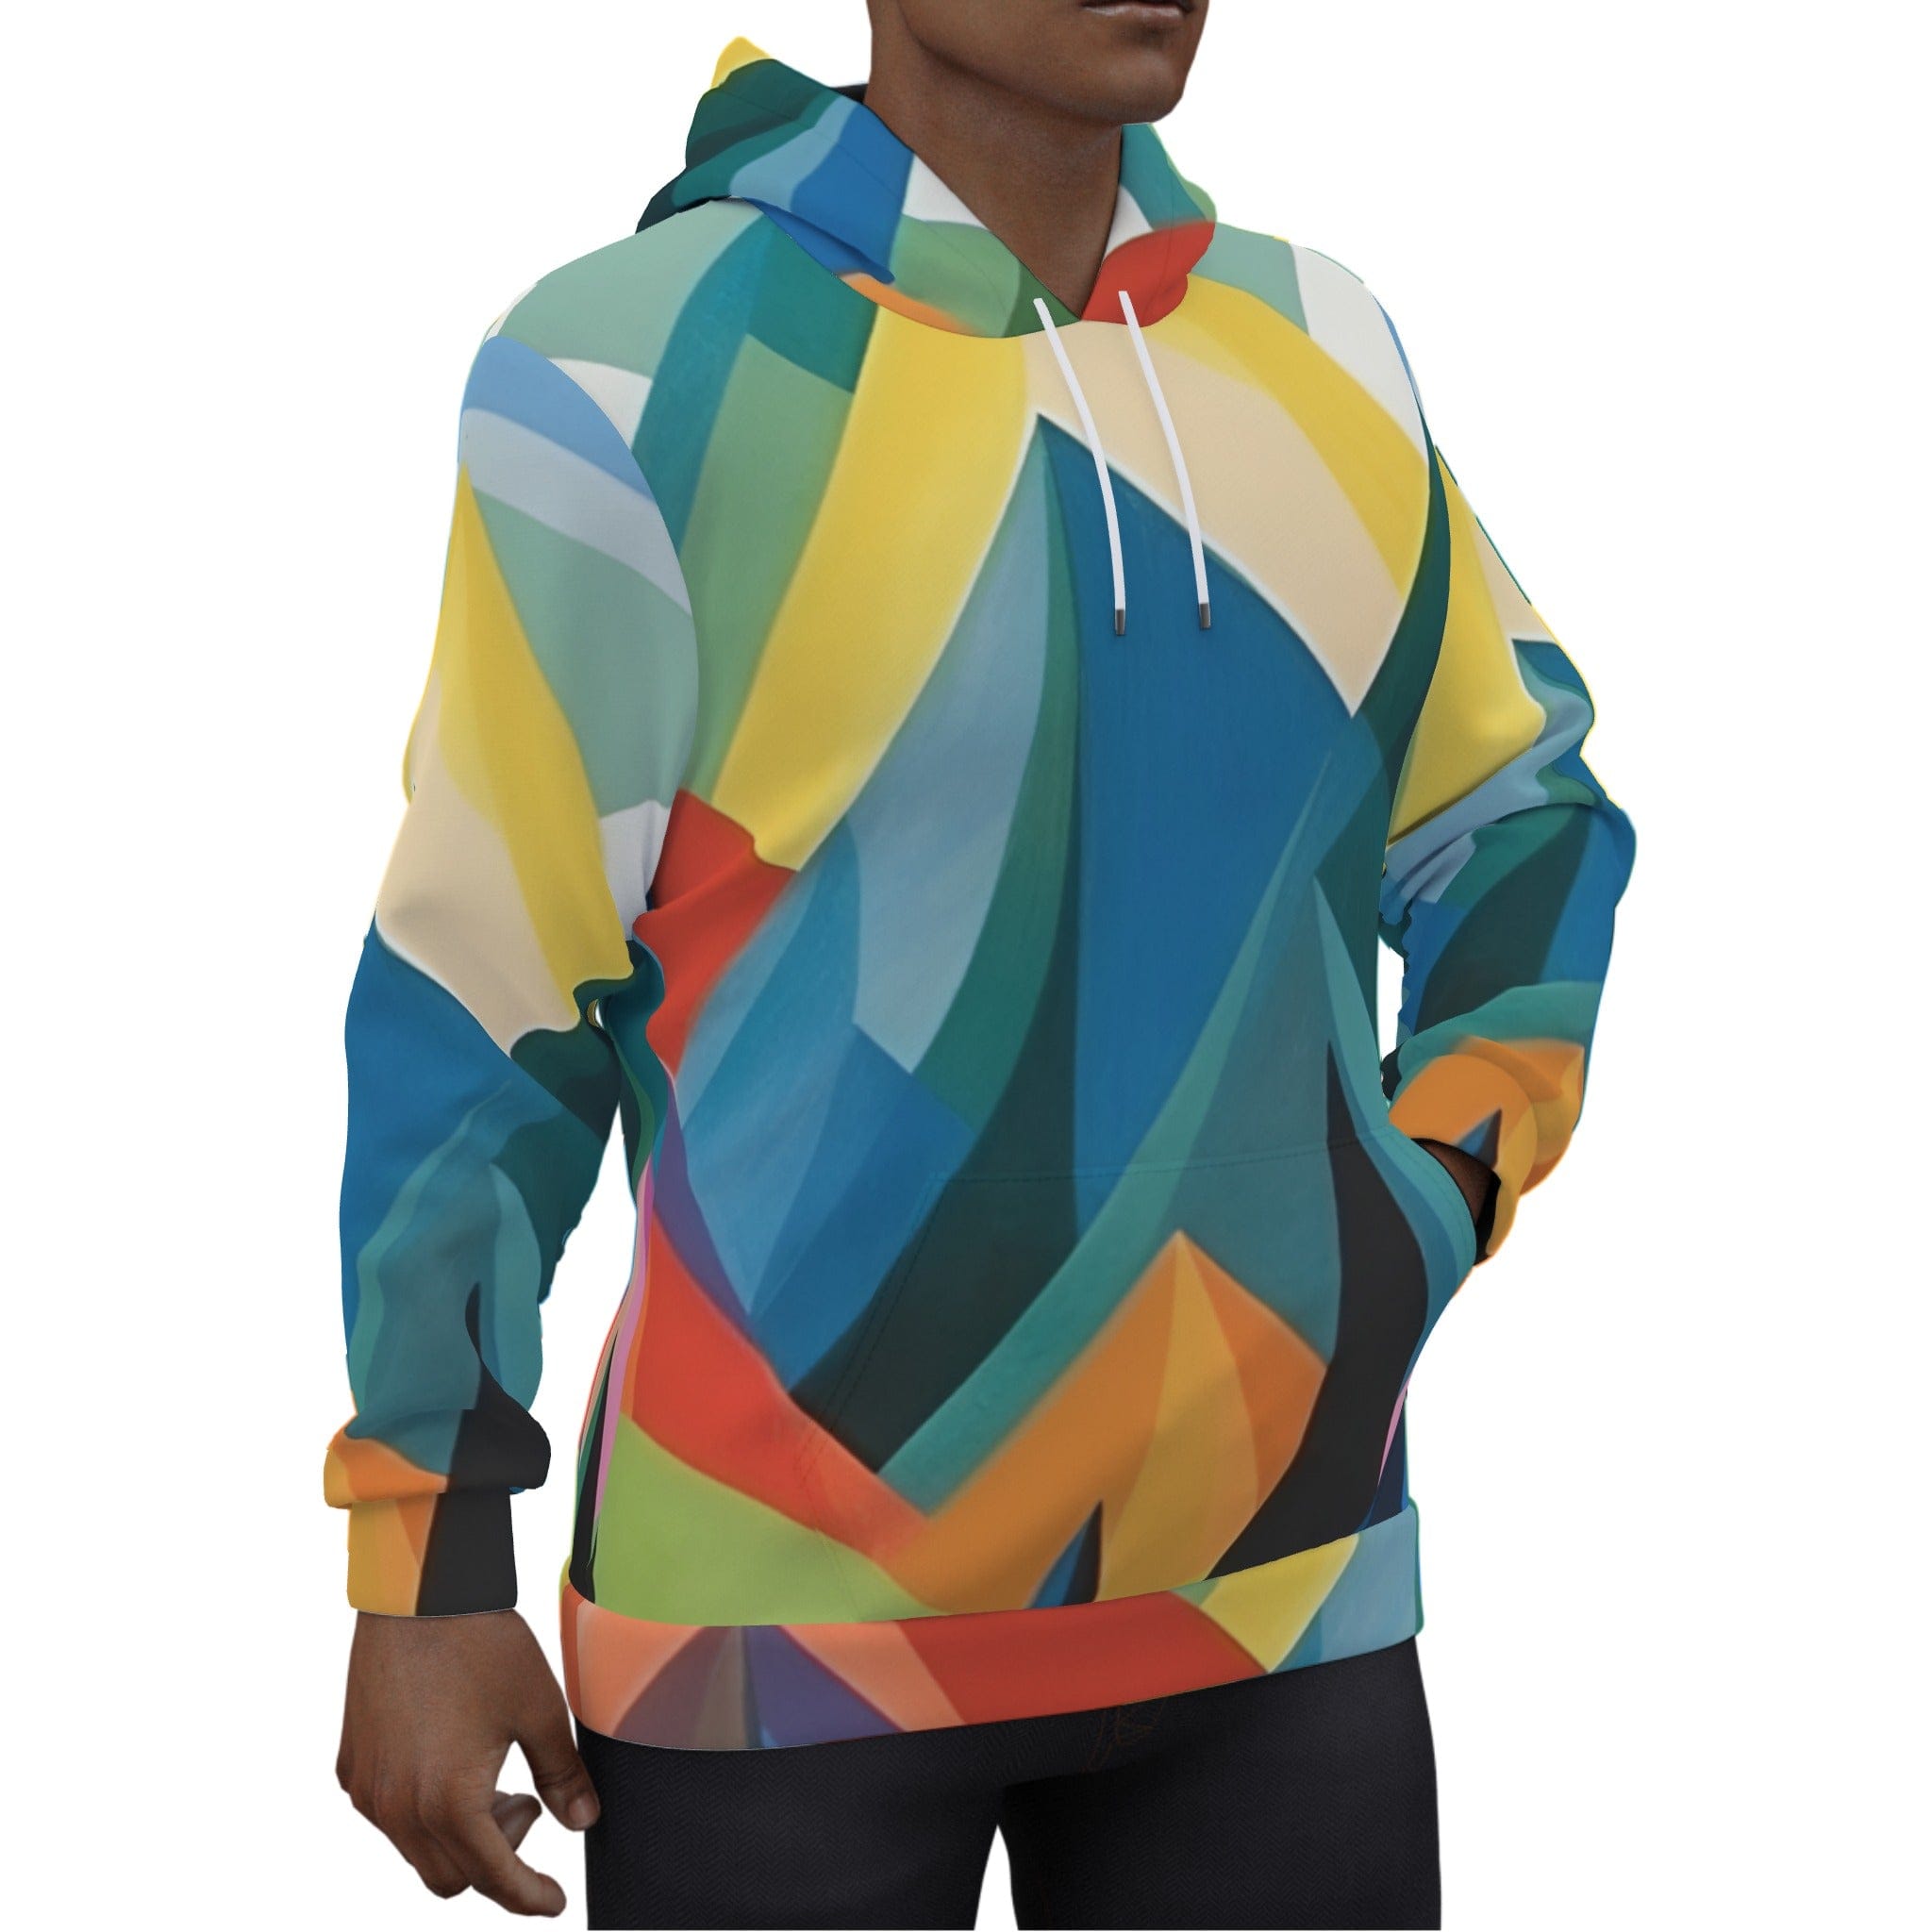 Yoycol All-Over Print Men's Pullover Hoodie